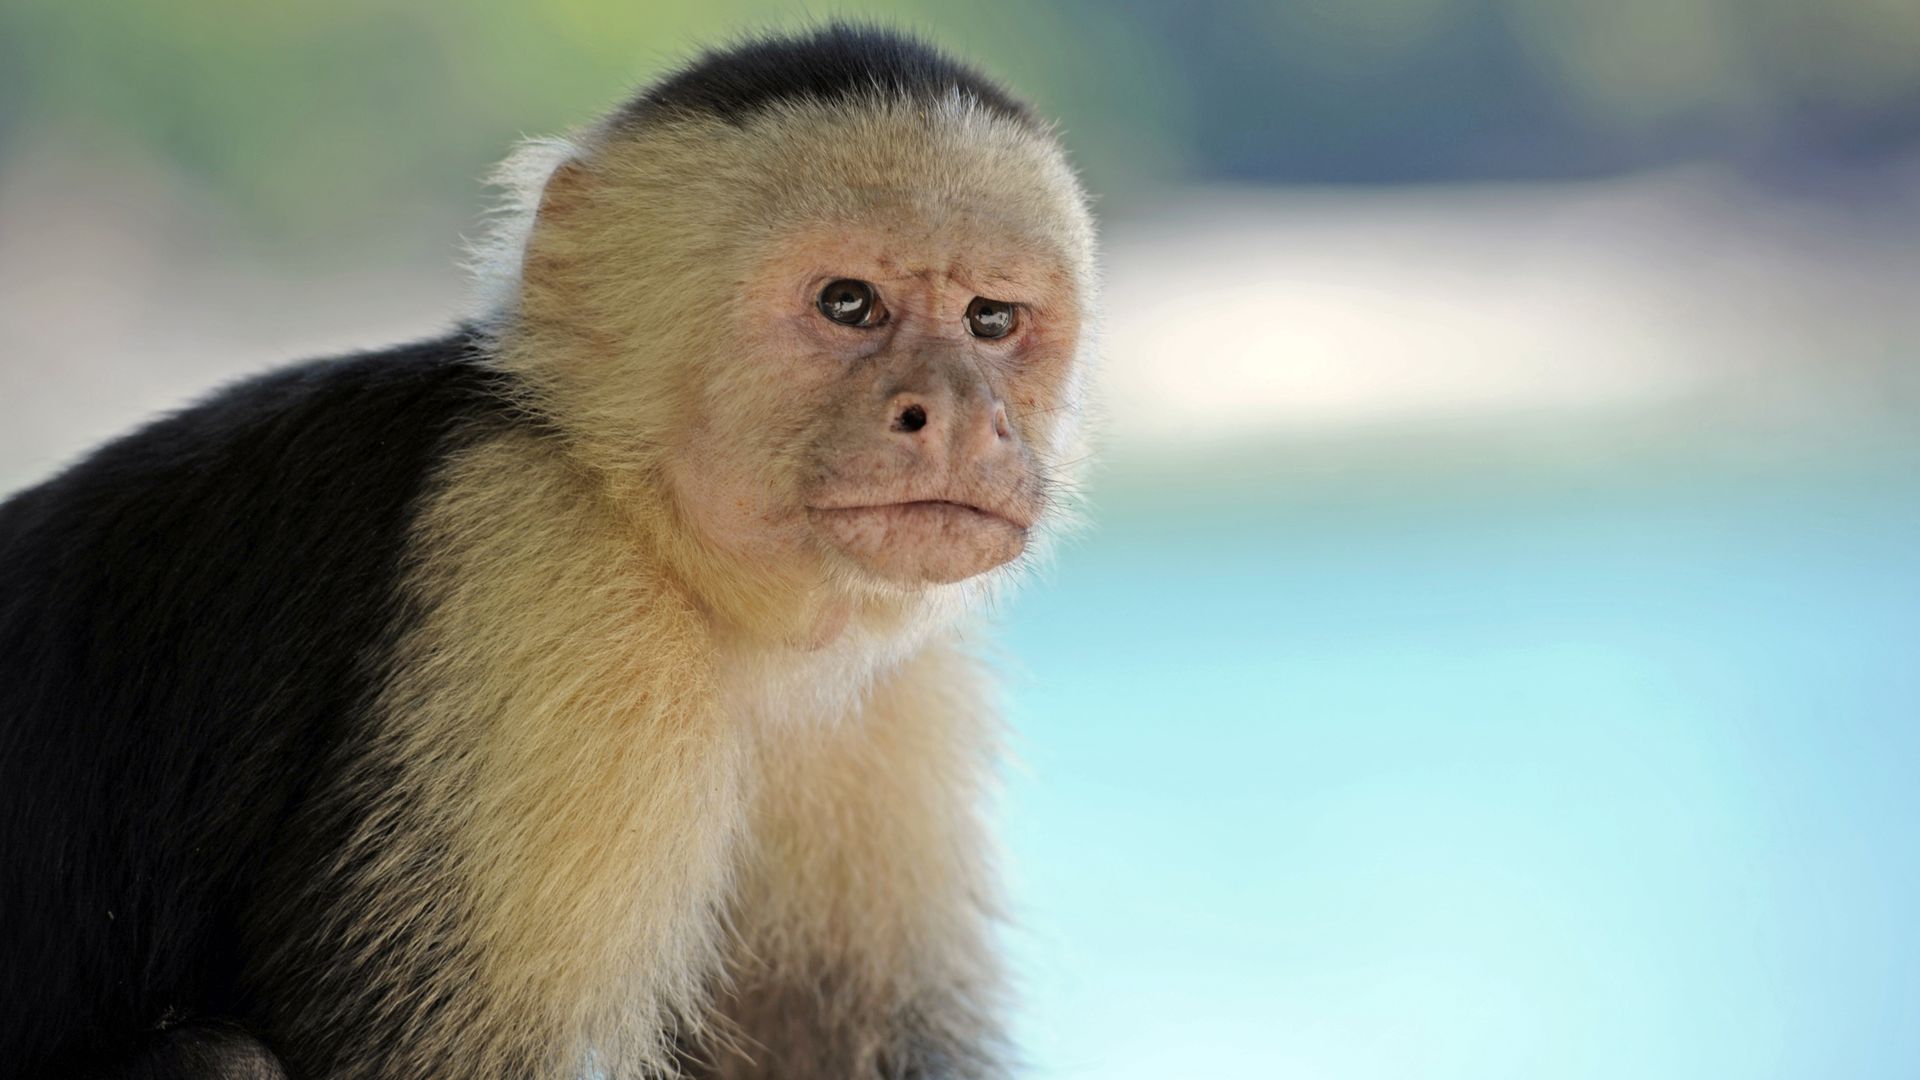 A white-headed capuchin monkey that appears to be scowling